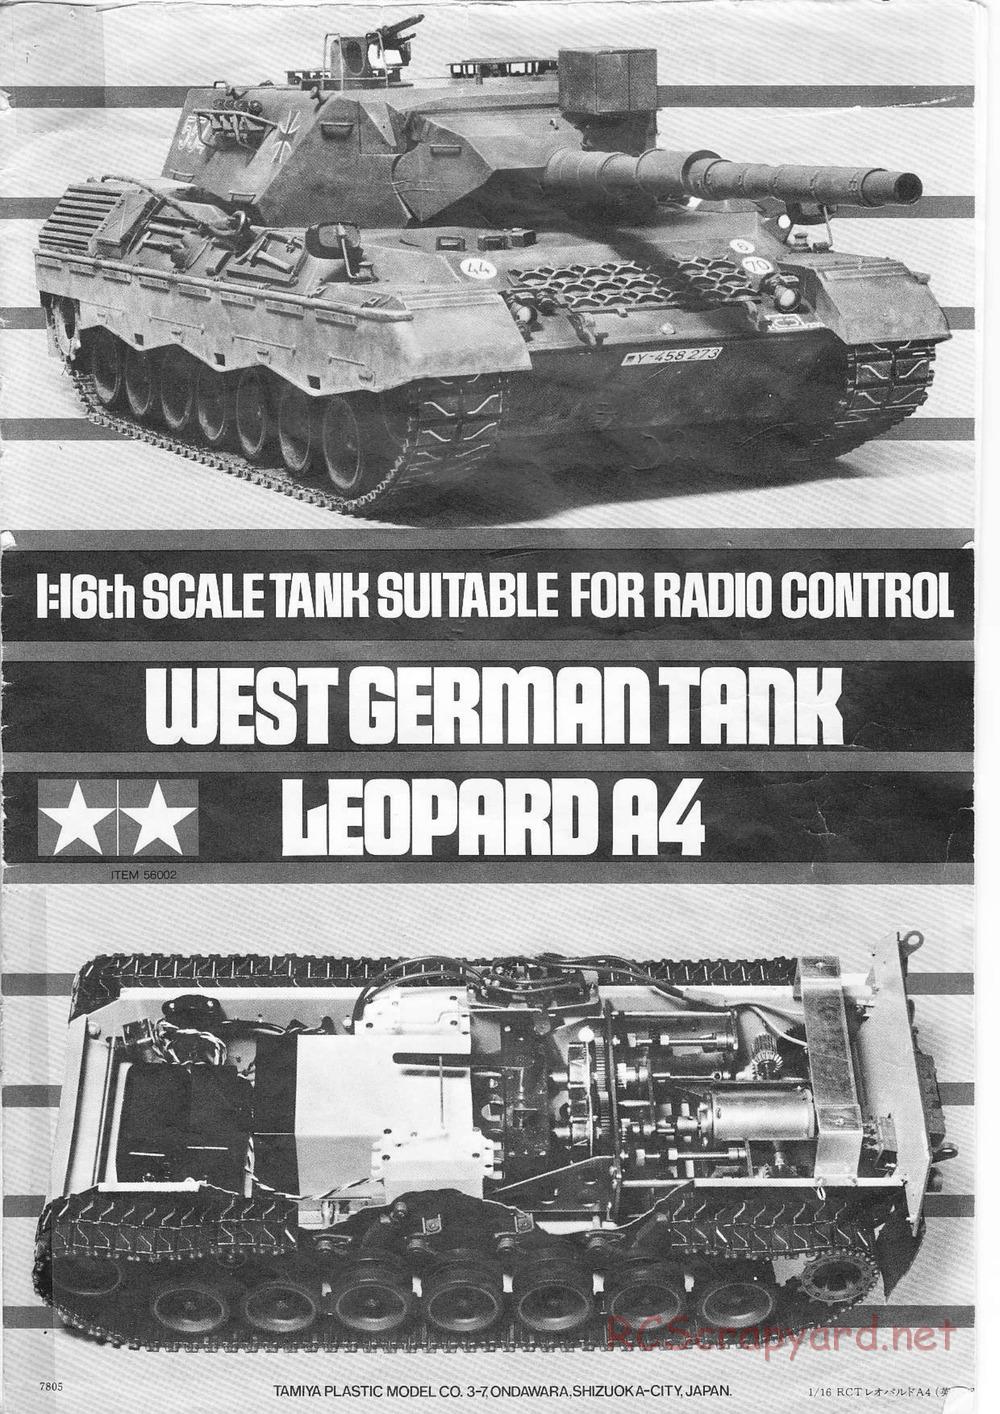 Tamiya - Leopard A4 - 1/16 Scale Chassis - Manual - Page 1